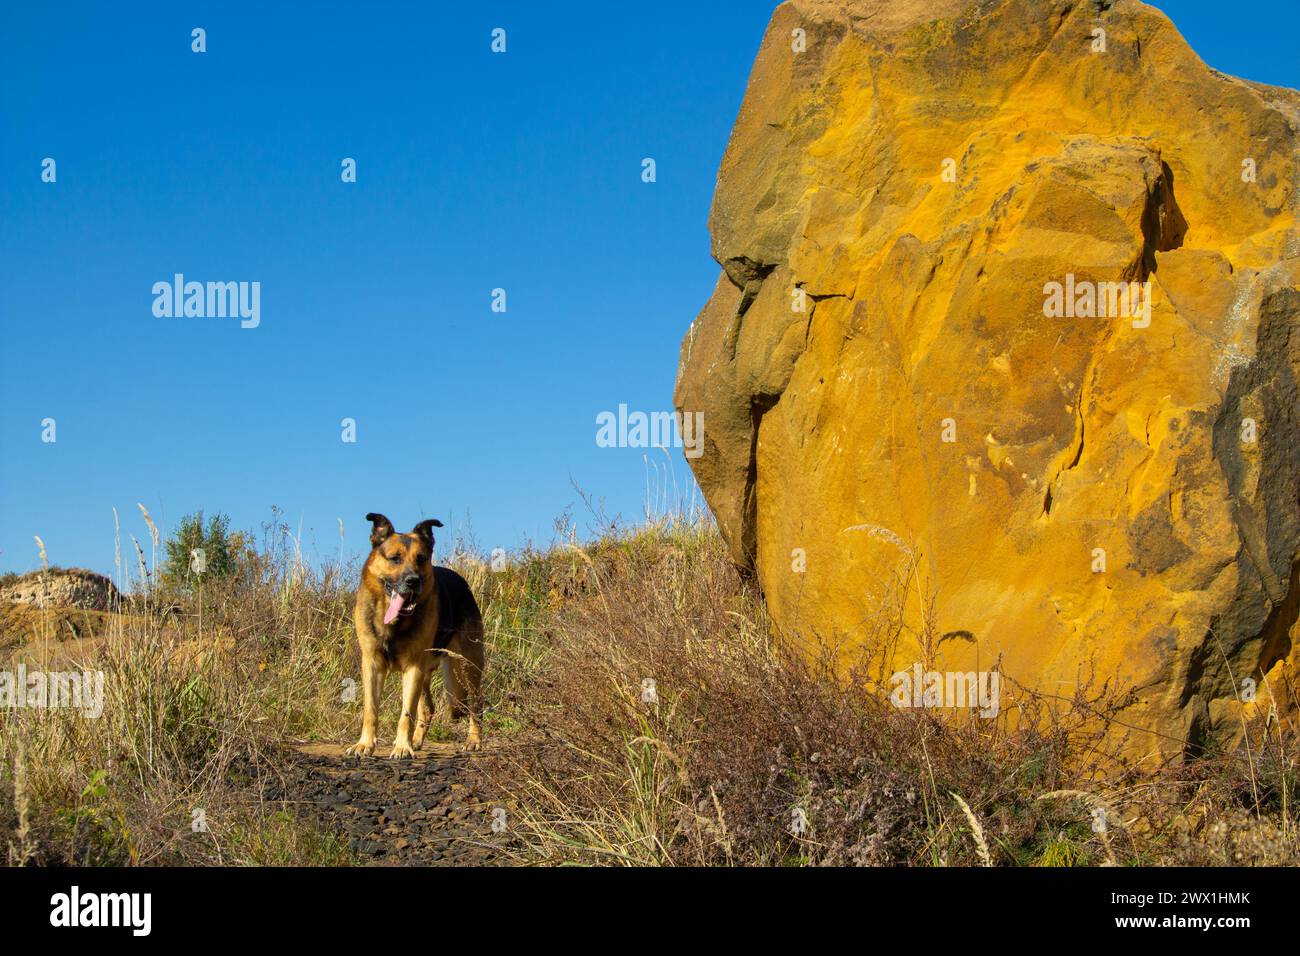 funny dog shows tongue and stands near big rock in autumn, dog west near rock made of sand Stock Photo